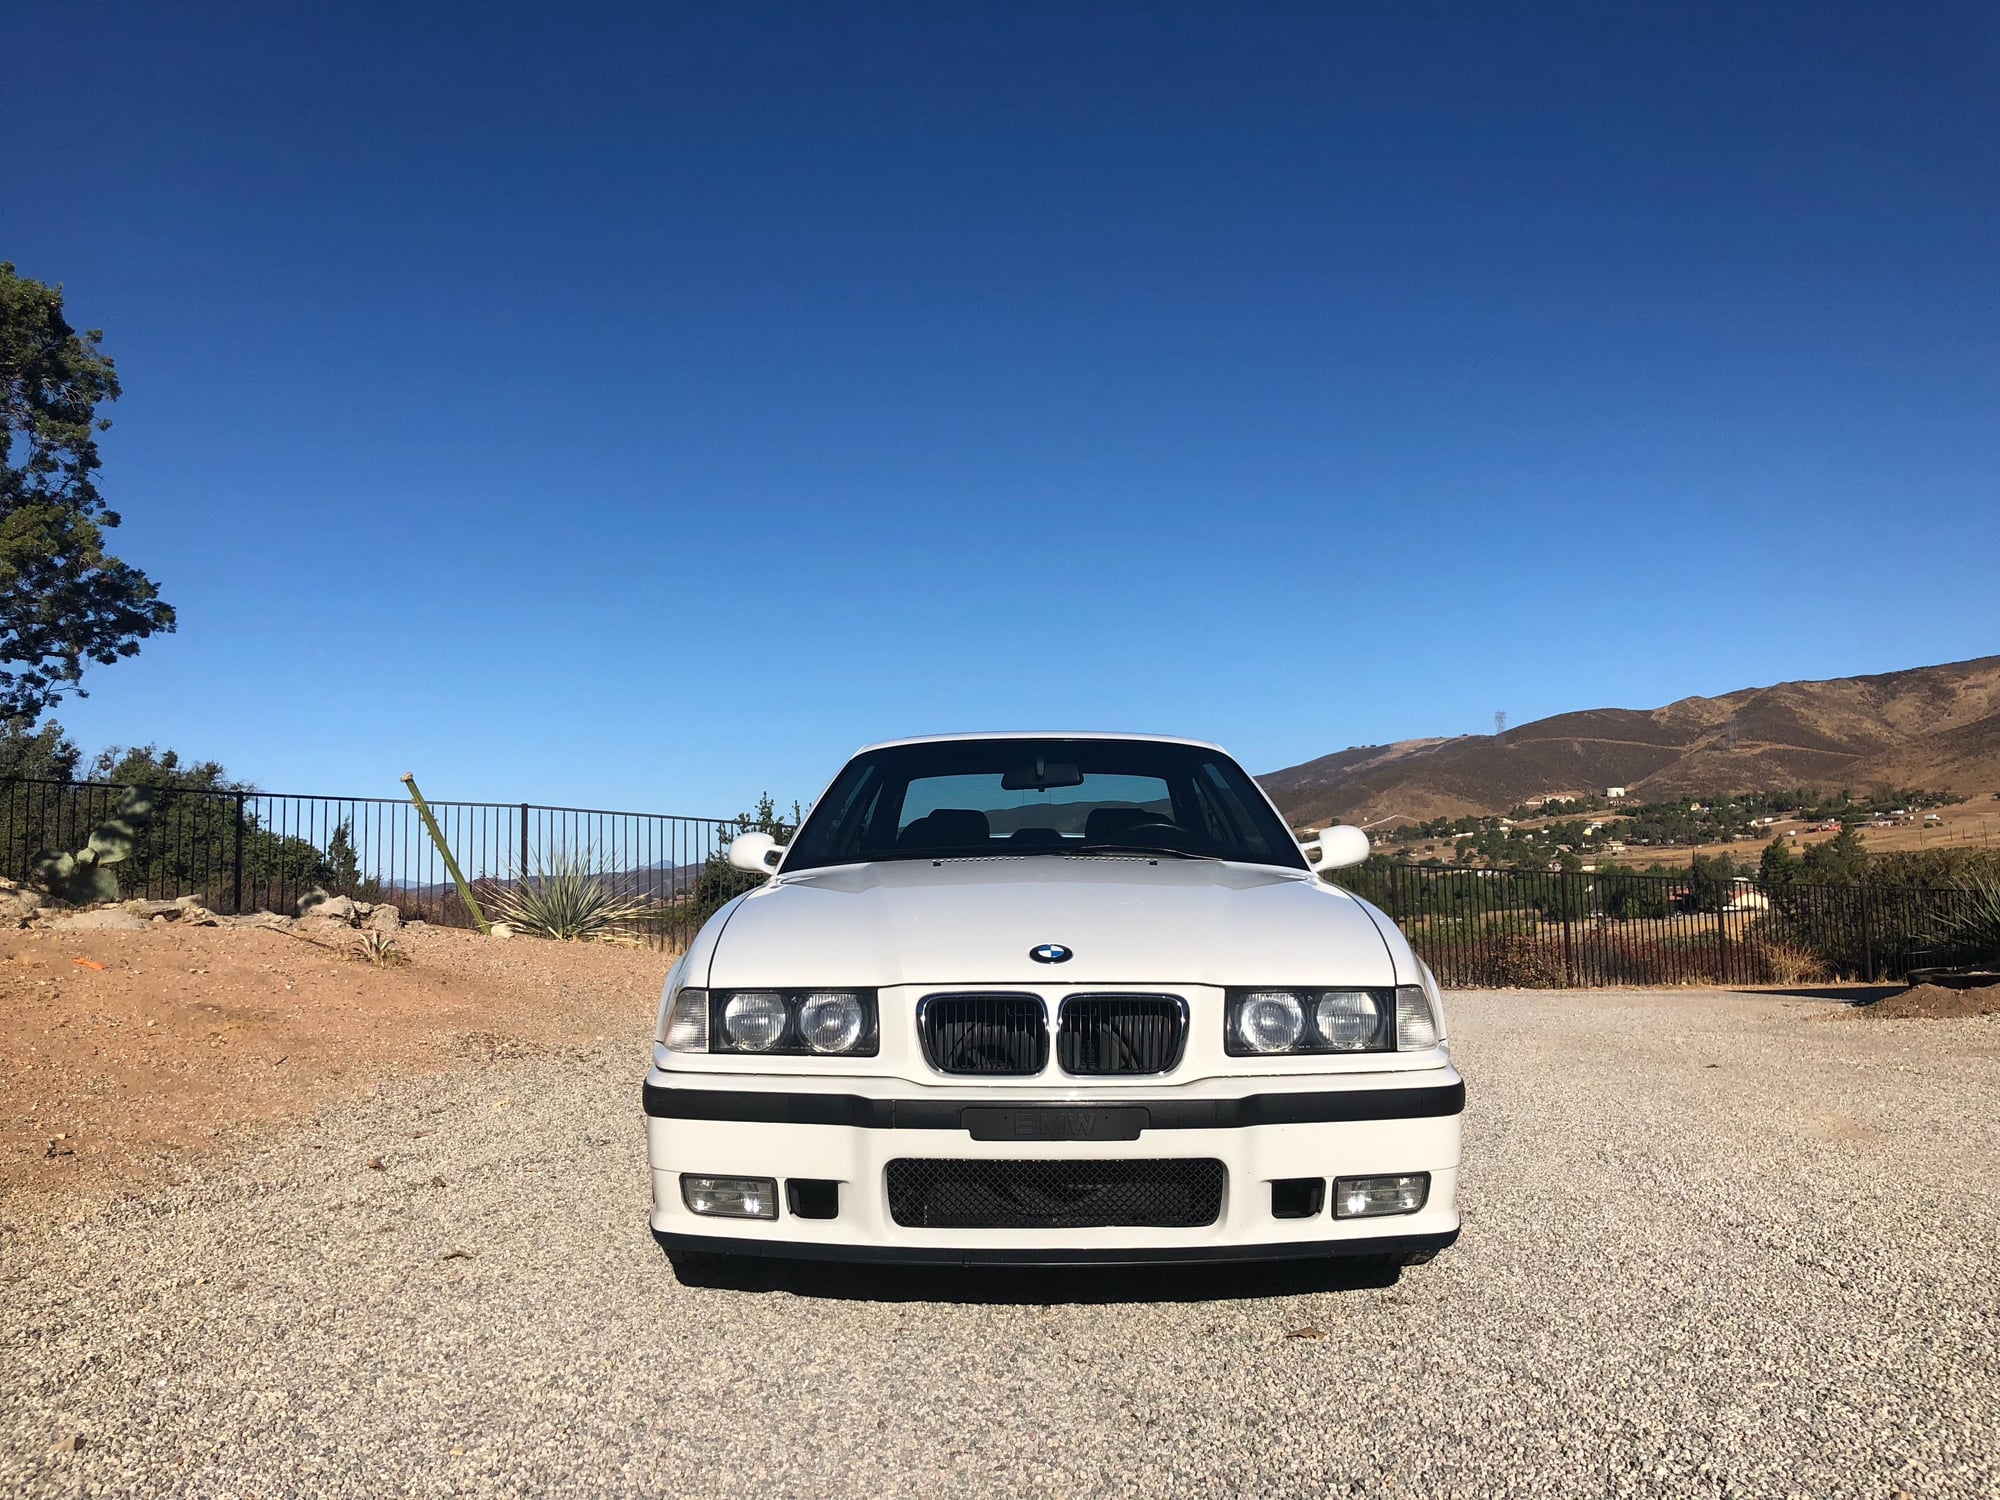 1999 BMW M3 - One owner. 1999 BMW E36 M3 - Used - VIN WBSBG9339XEY81639 - 145,120 Miles - 6 cyl - 2WD - Manual - Coupe - White - Burbank, CA 91502, United States